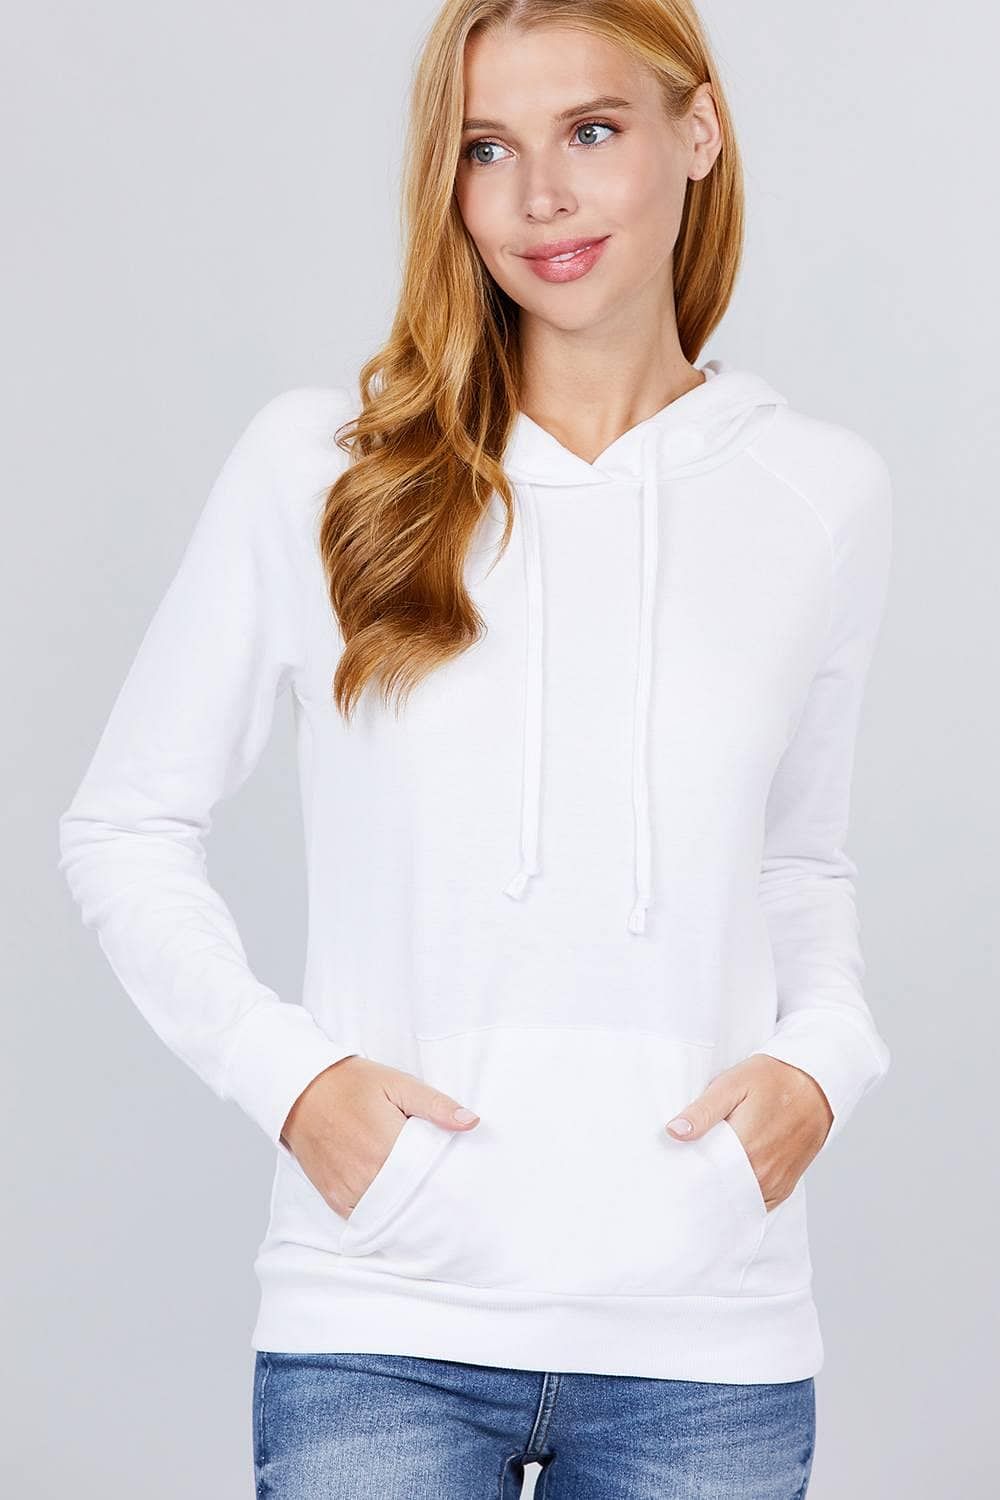 Pure White French Terry Long Sleeve Sweatshirt - Shopping Therapy S Sweatshirt